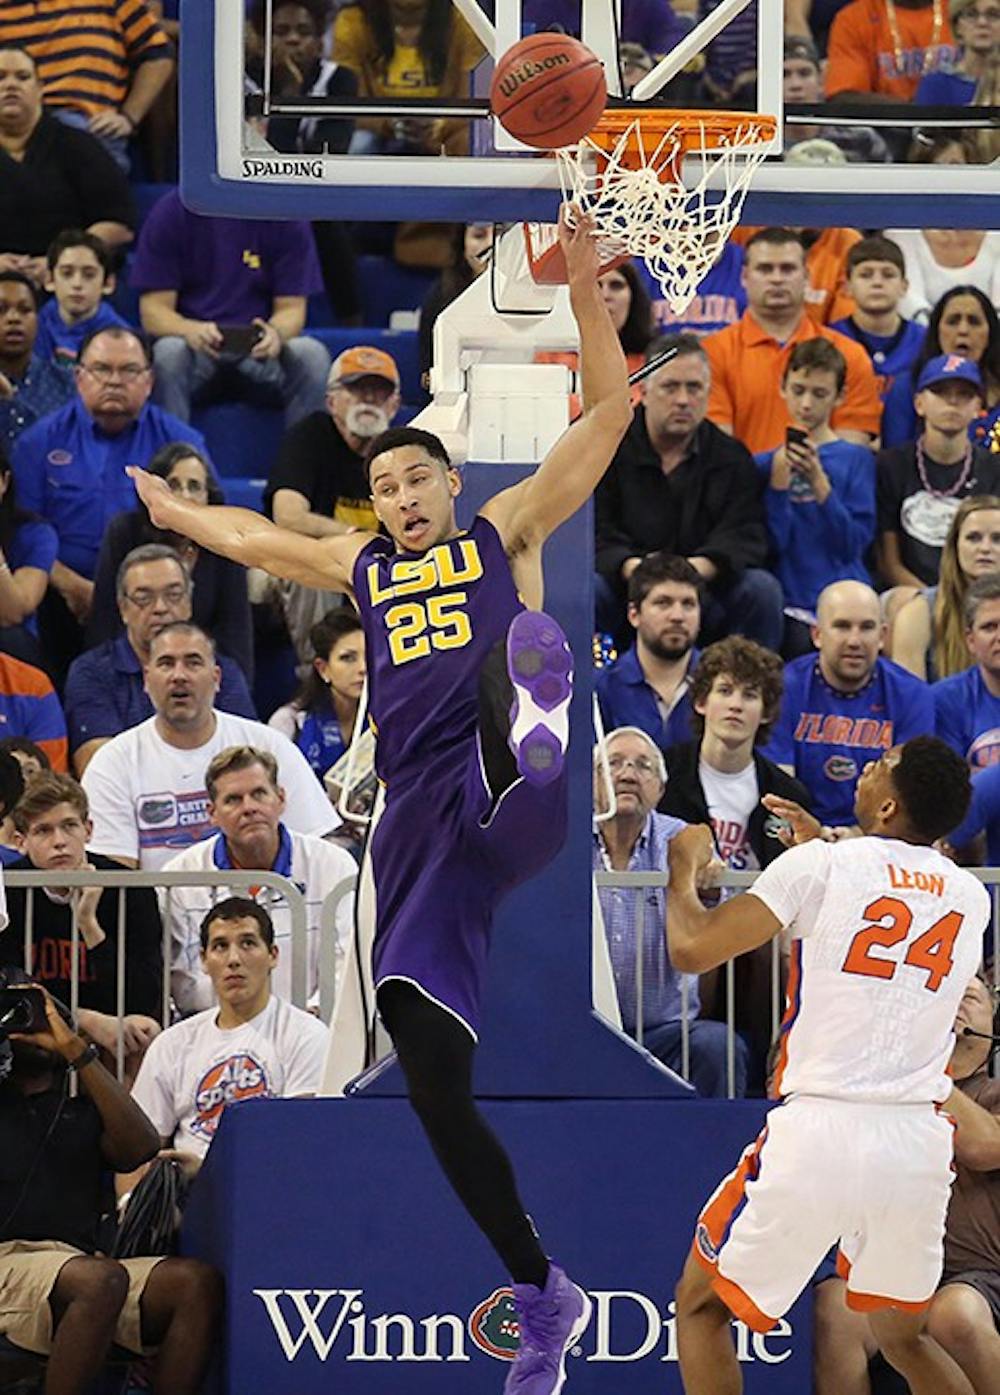 LSU&apos;s Ben Simmons (25) leaps for a rebound against Florida at the Stephen C. O&apos;Connell Center in Gainesville, Fla., on Saturday, Jan. 9, 2016. Florida won, 68-62. (Stephen M. Dowell/Orlando Sentinel/TNS)